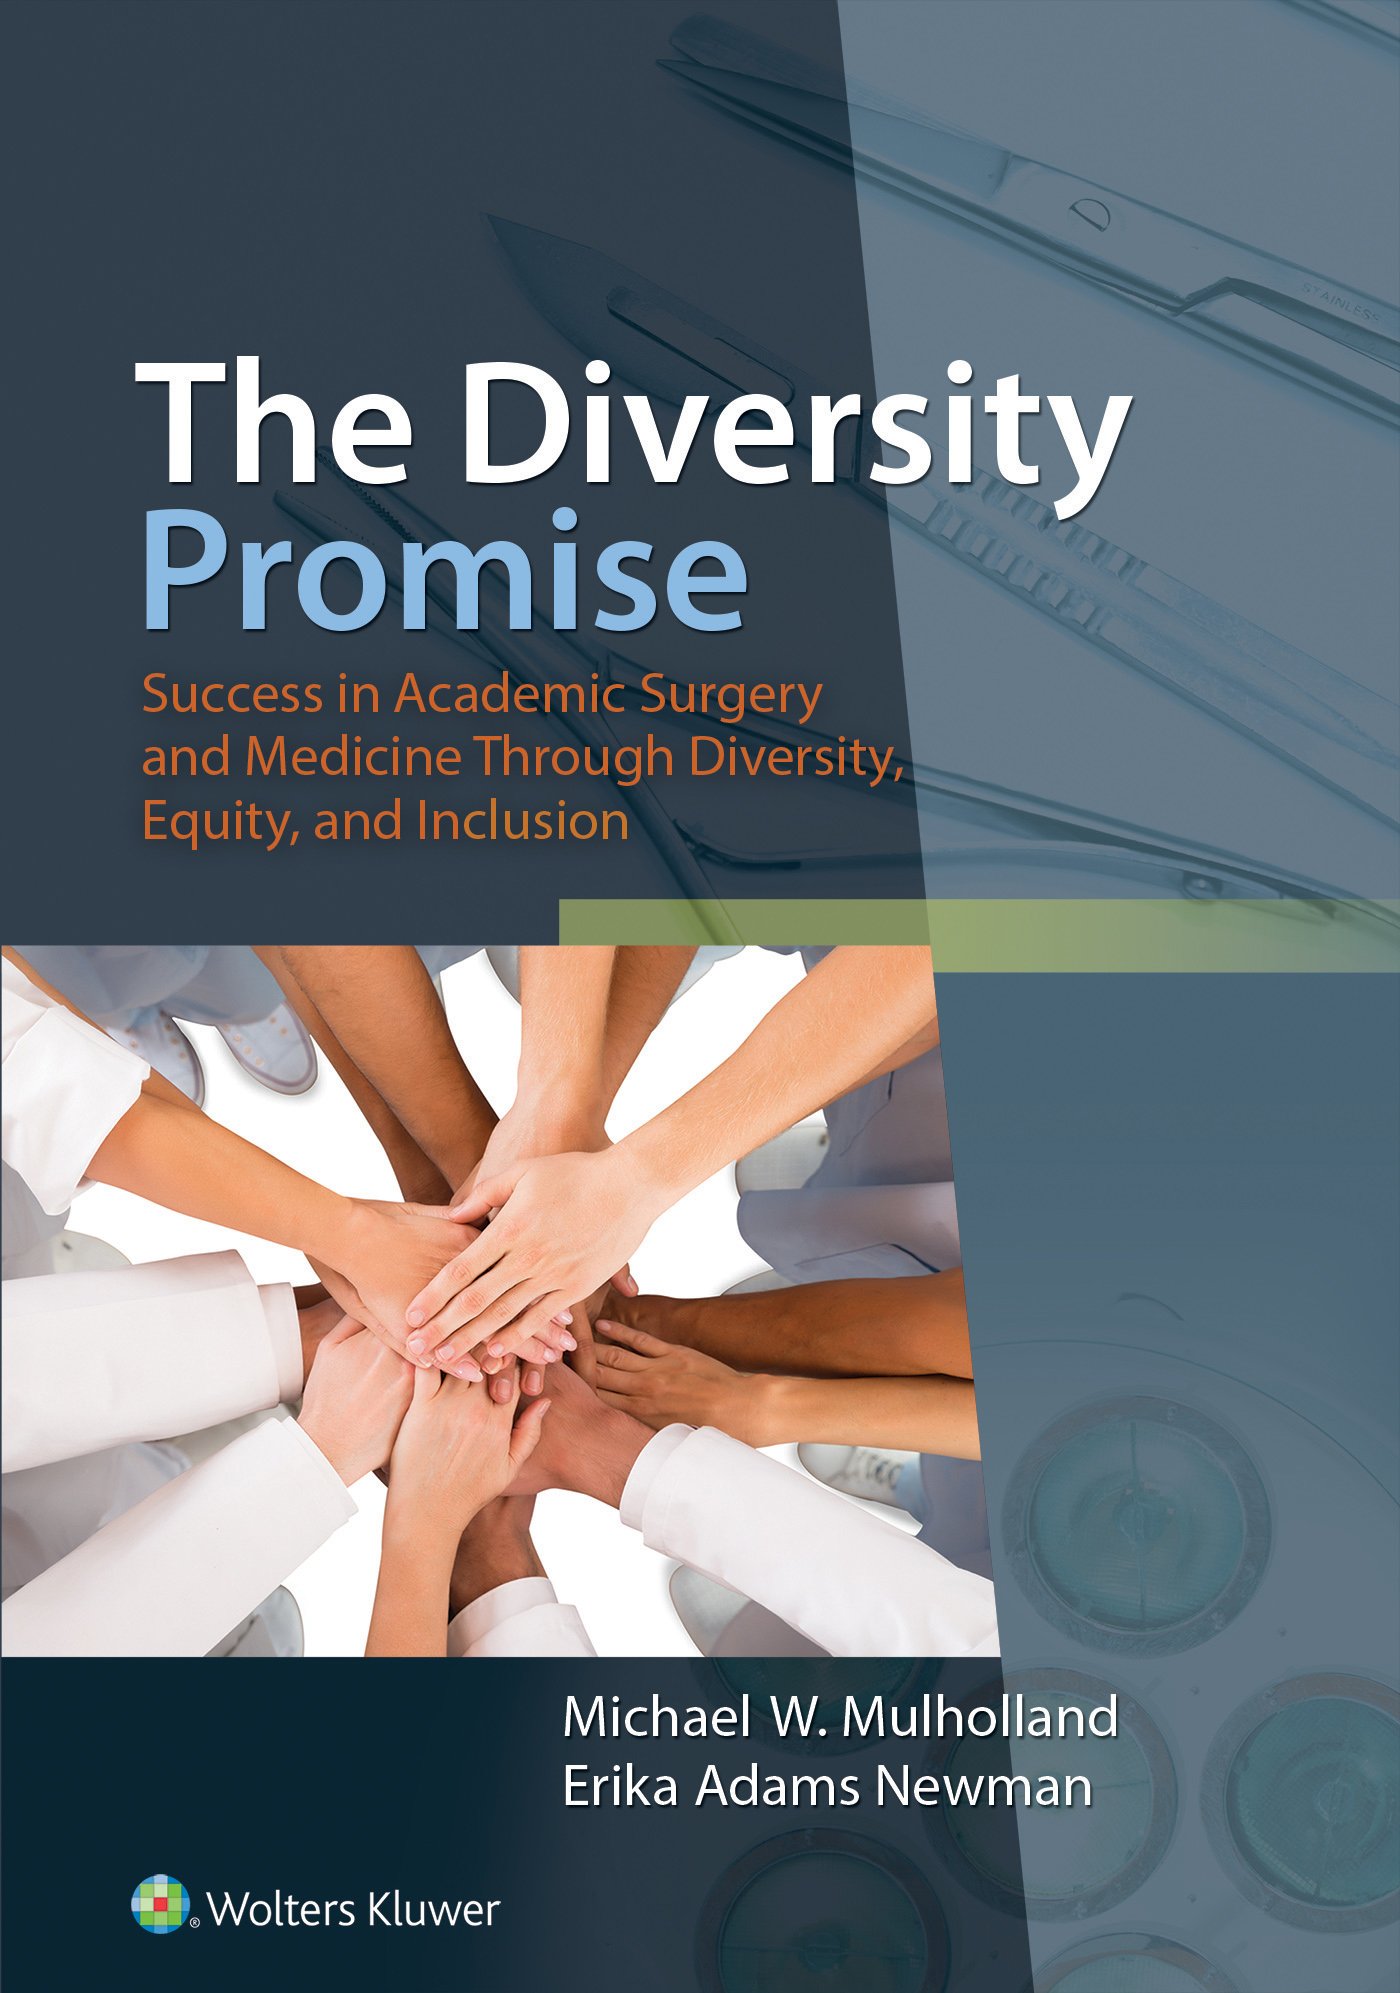 The Diversity Promise: Success in Academic Surgery and Medicine Through Diversity, Equity, and Inclusion (Original PDF from Publisher)